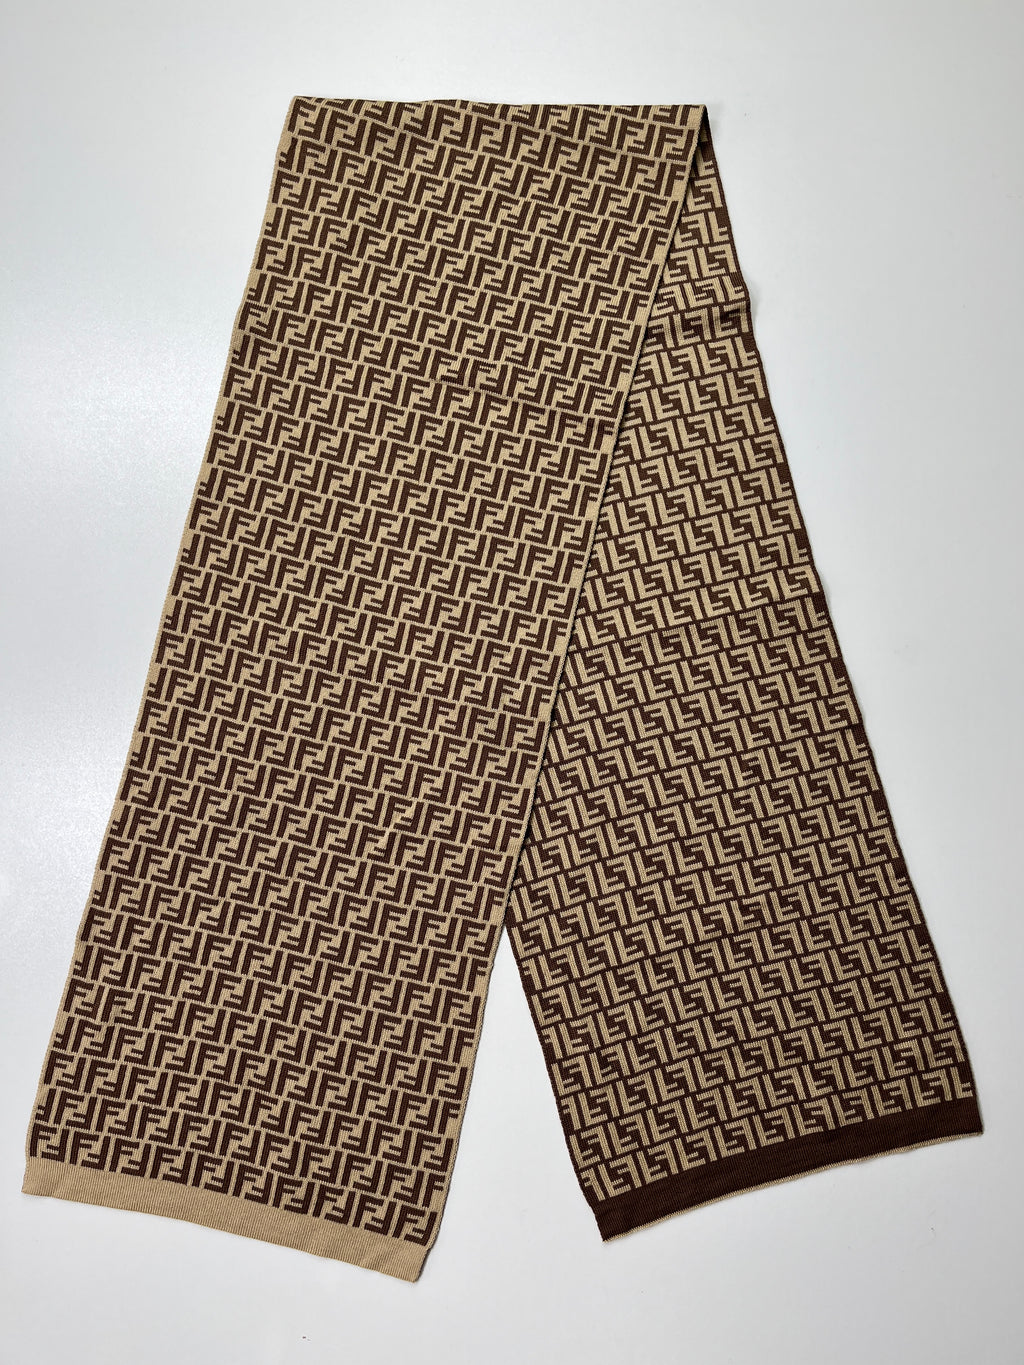 FENDI - BEIGE & BROWN ZUCCA SCARF - NEW WITH TAGS